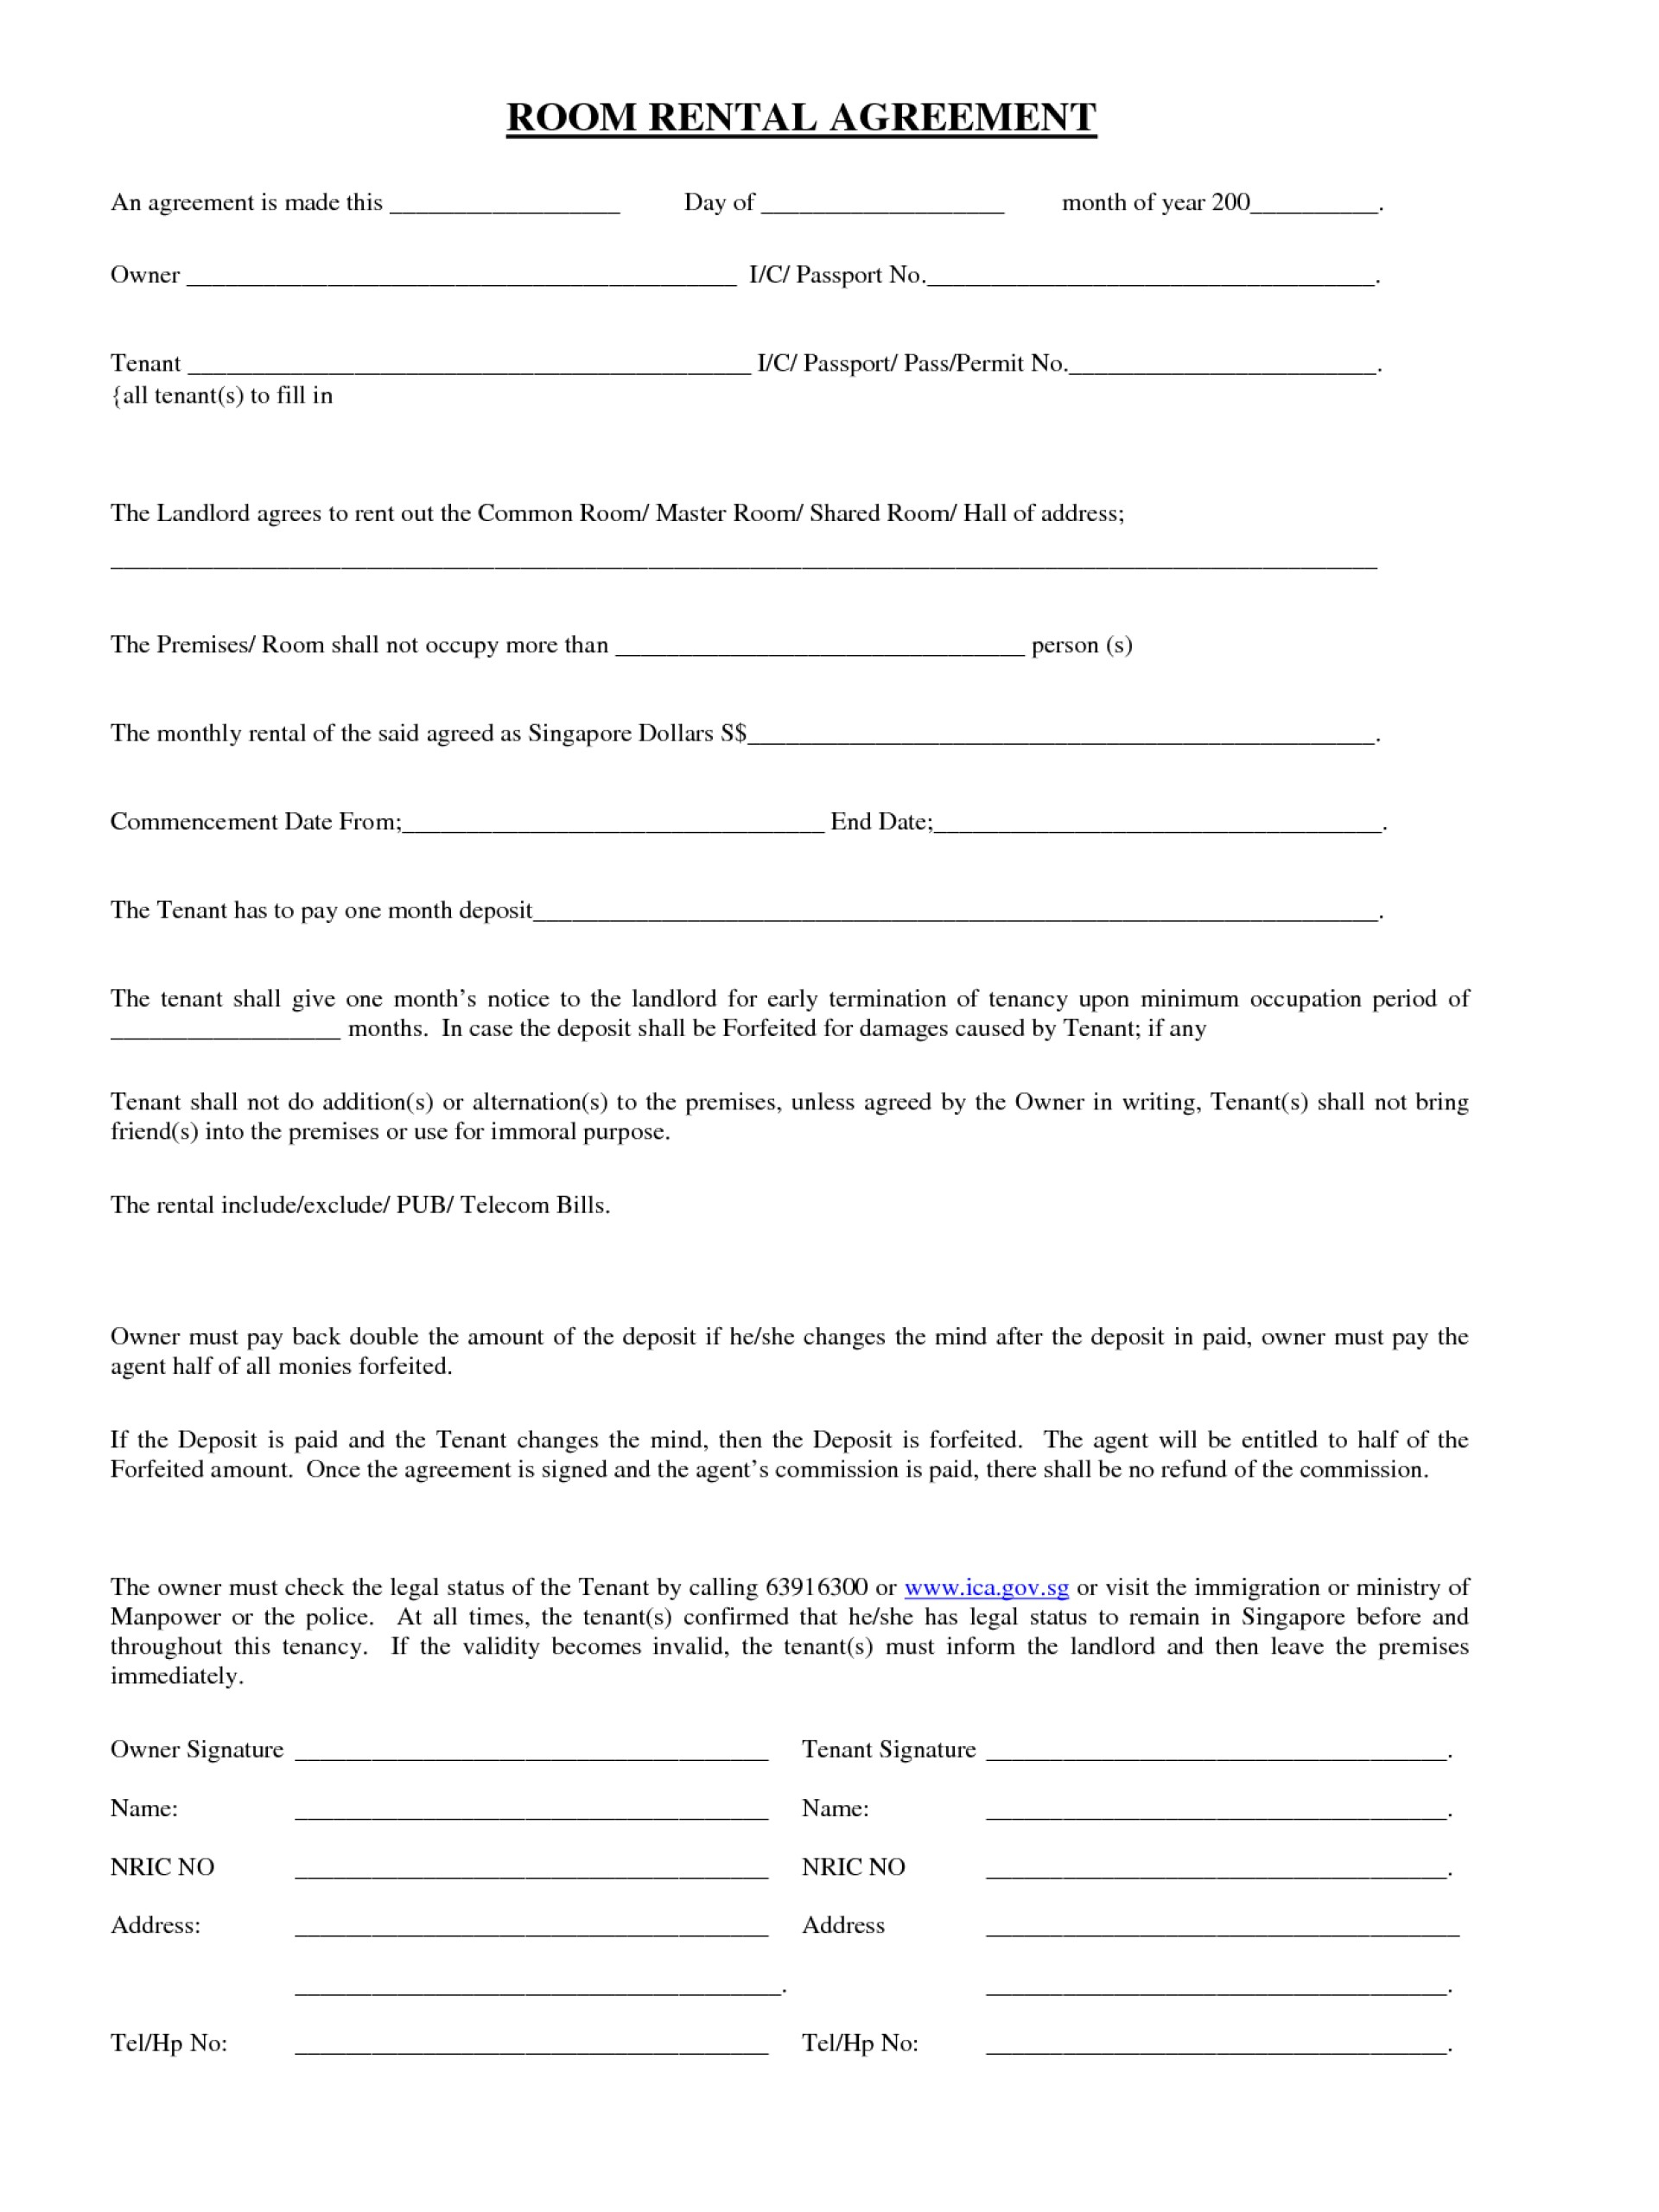 Oklahoma Lease Agreement 006 House Rental Contract Template Homee Agreement Forms Washington